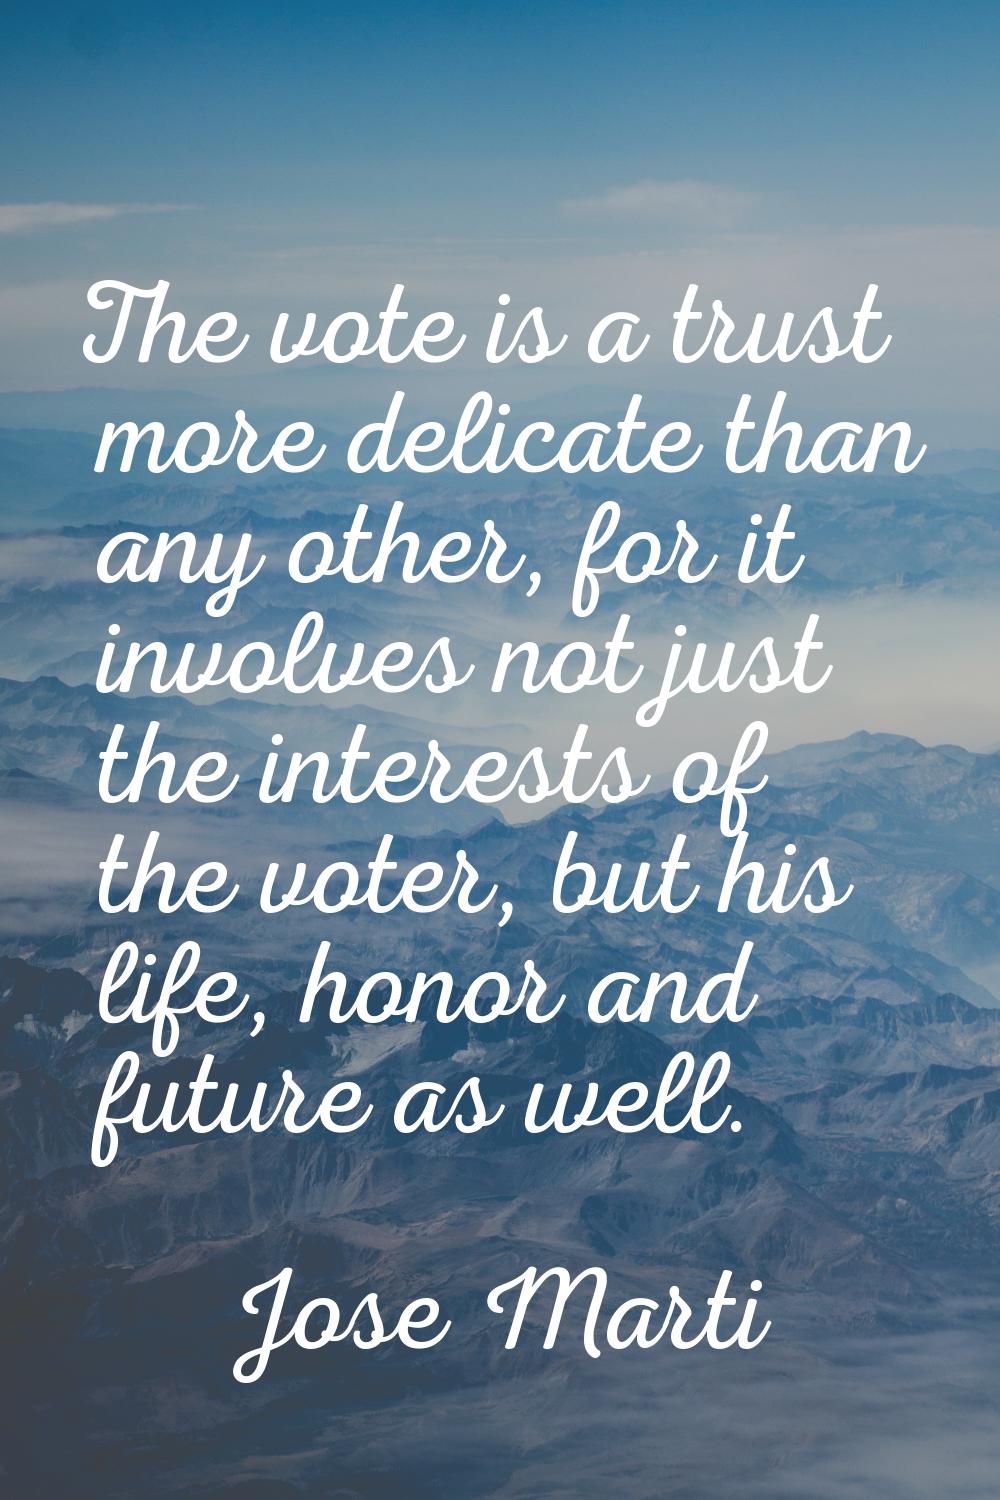 The vote is a trust more delicate than any other, for it involves not just the interests of the vot